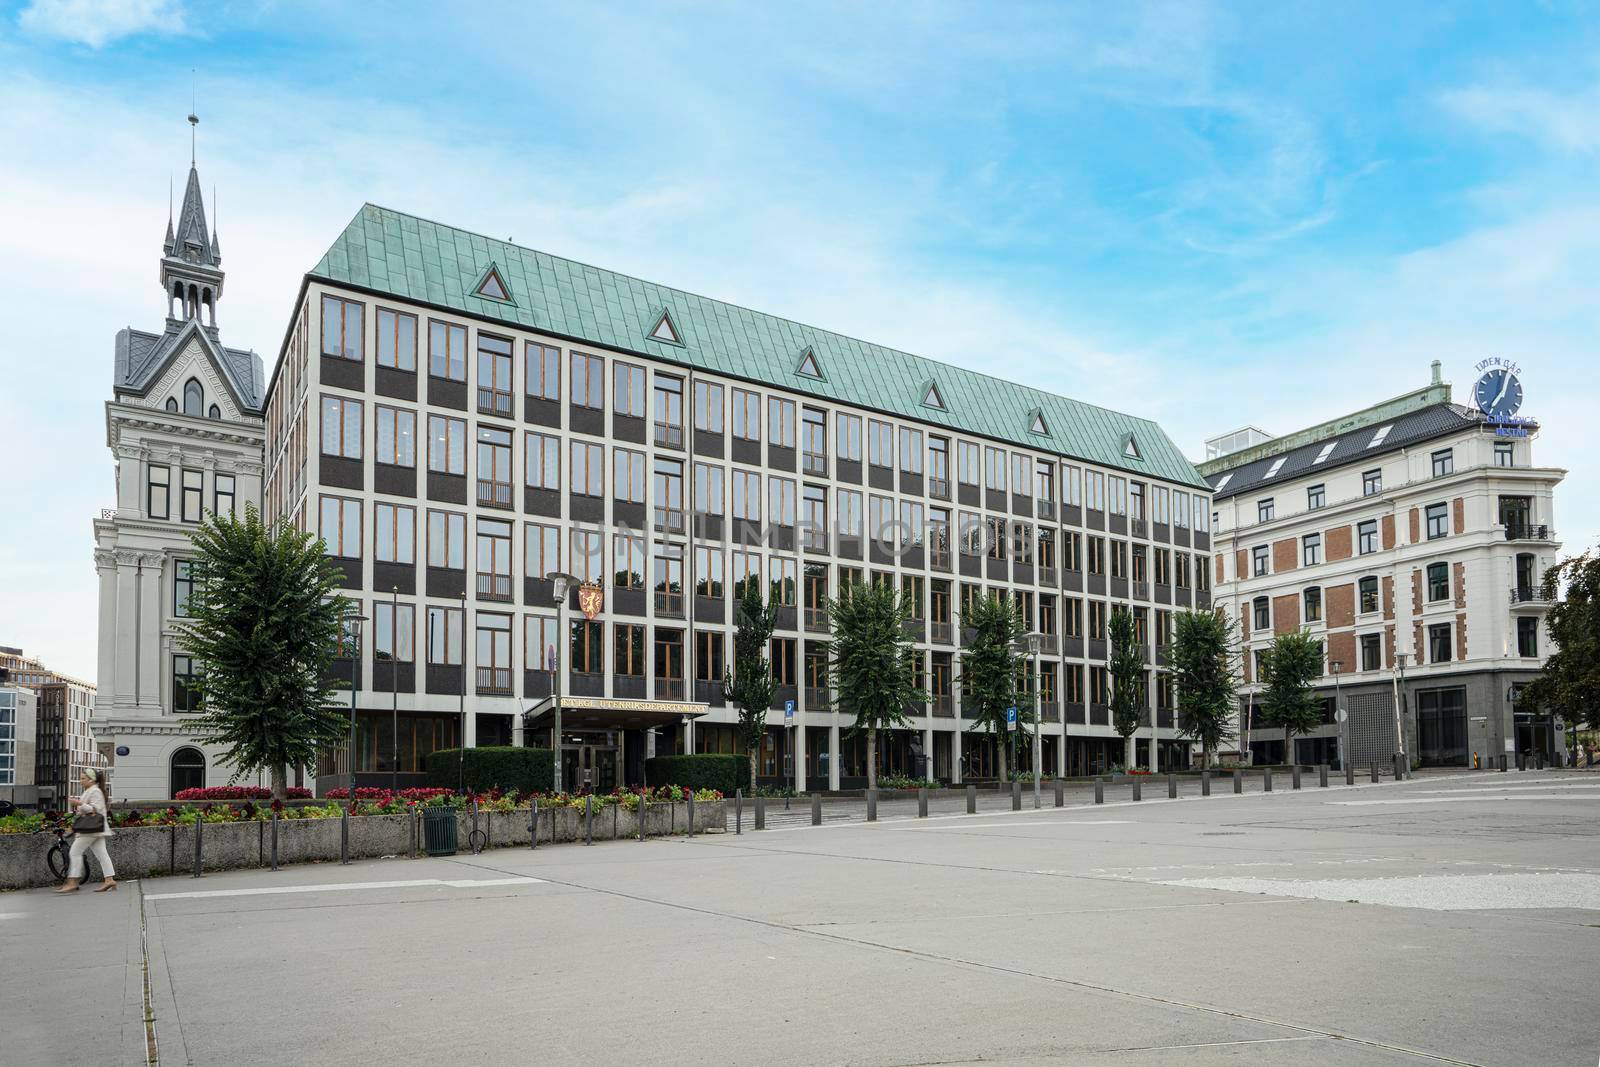 Foreign affairs ministry of Norway building in Oslo
 by sergiodv